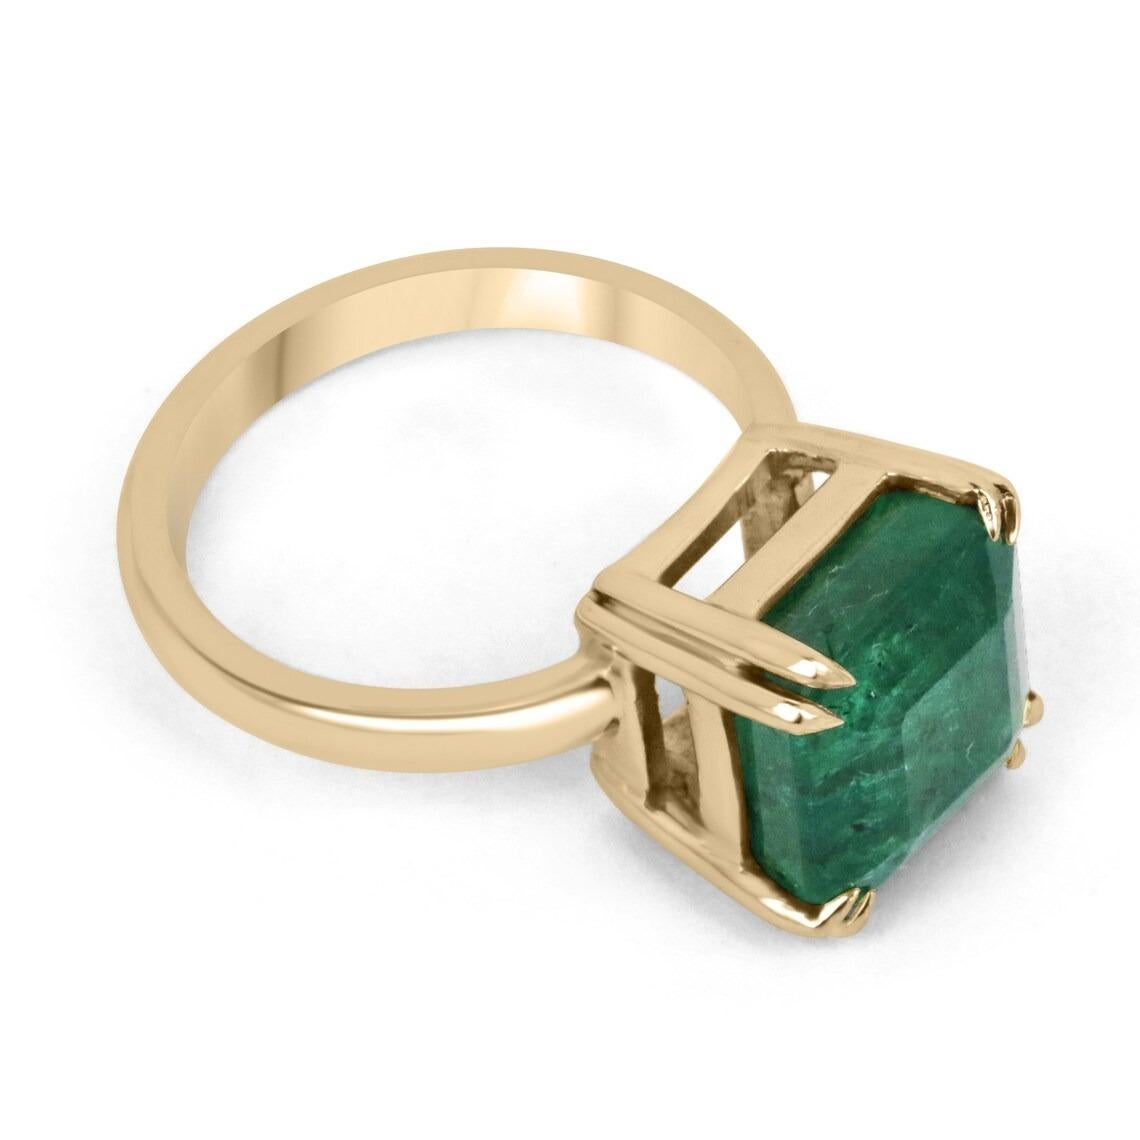 Displayed is a 7.0-carat classic emerald solitaire, Asscher-cut, engagement, or right-hand ring in 18K yellow gold. This gorgeous solitaire ring carries an earth-mined emerald in a secure double-prong setting. Fully faceted, this gemstone showcases